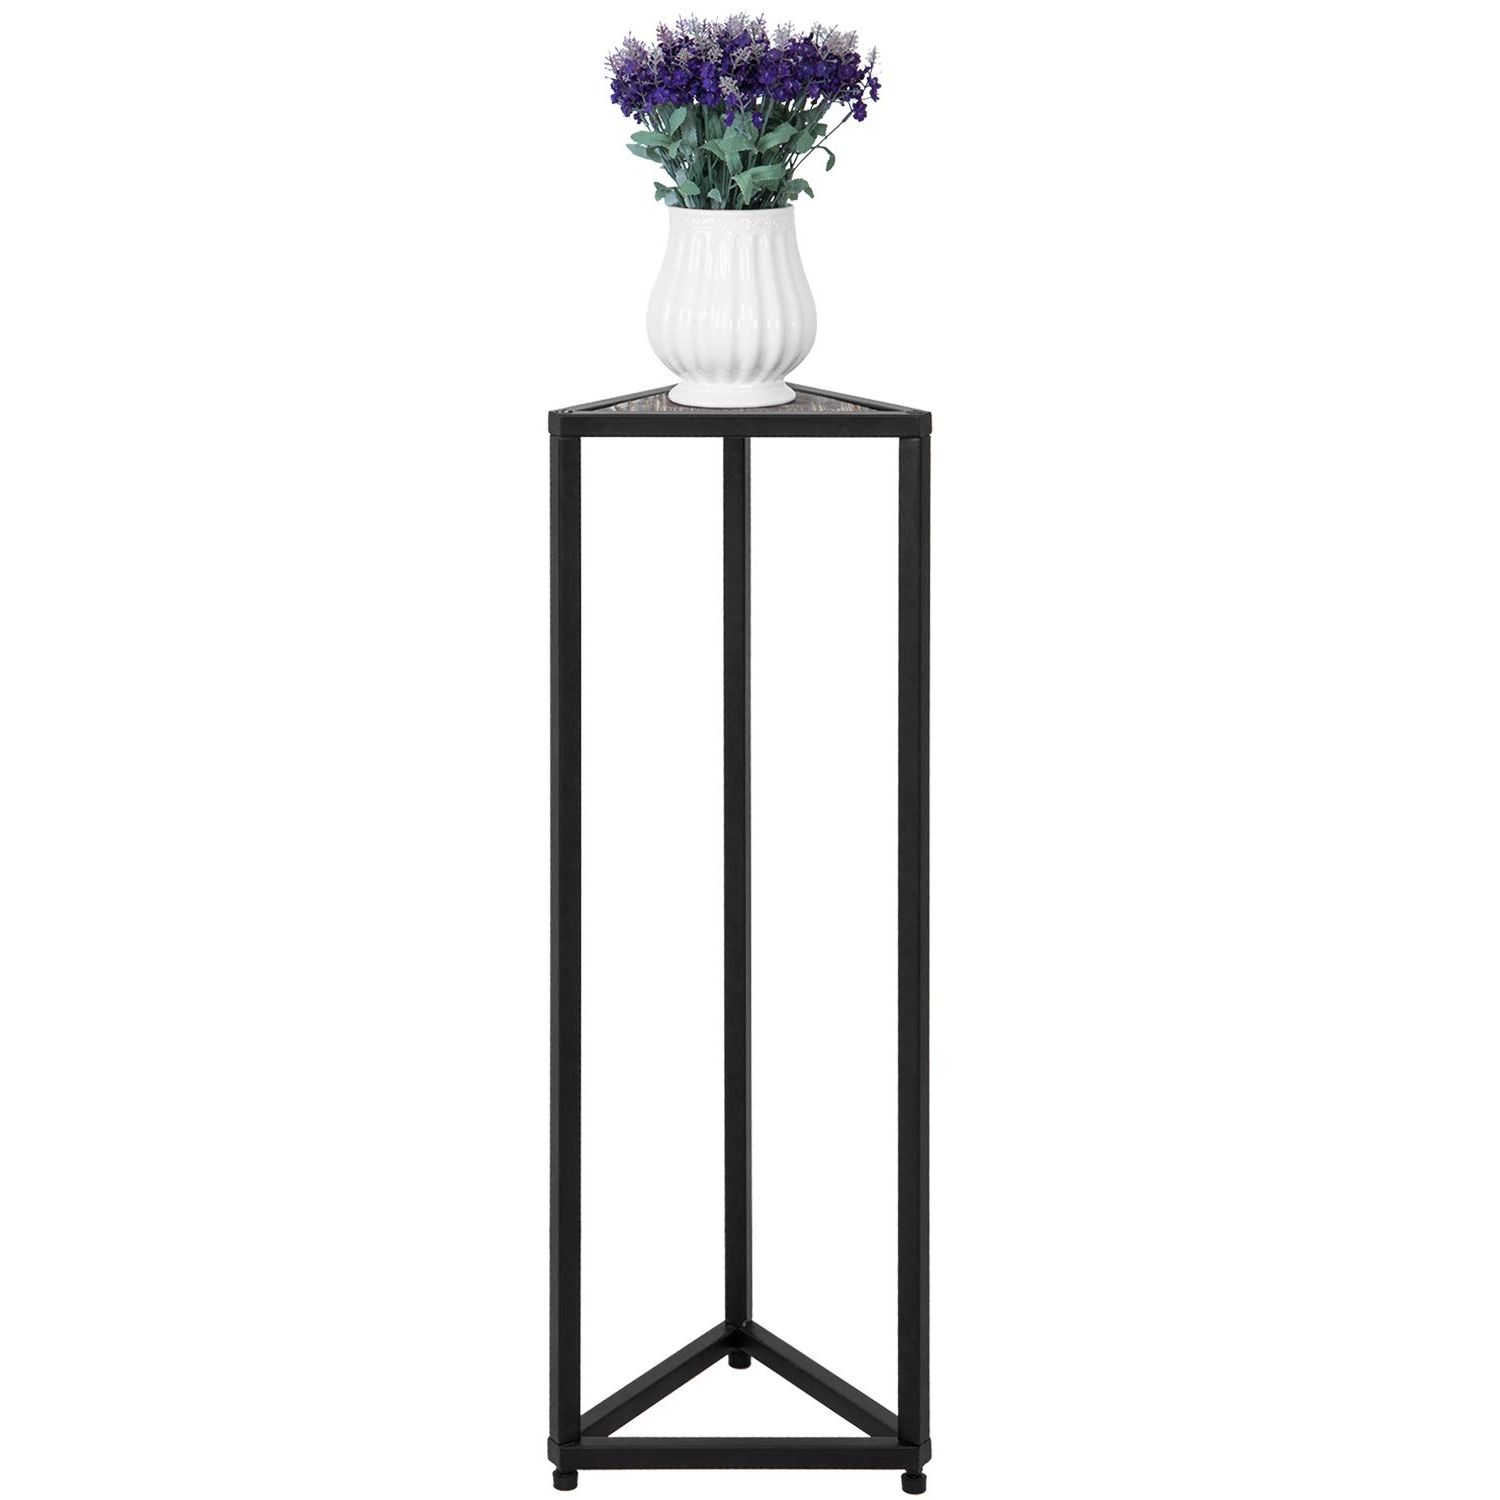 36 Inch Plant Stands With Regard To Most Recently Released Mygift 36 Inch Triangular Plant Stand – Modern Torched Wood And Black Metal  Frame Flower Rack Potted Plant Pedestal Holder, Rustic Farmhouse Corner  Accent Table (View 2 of 10)